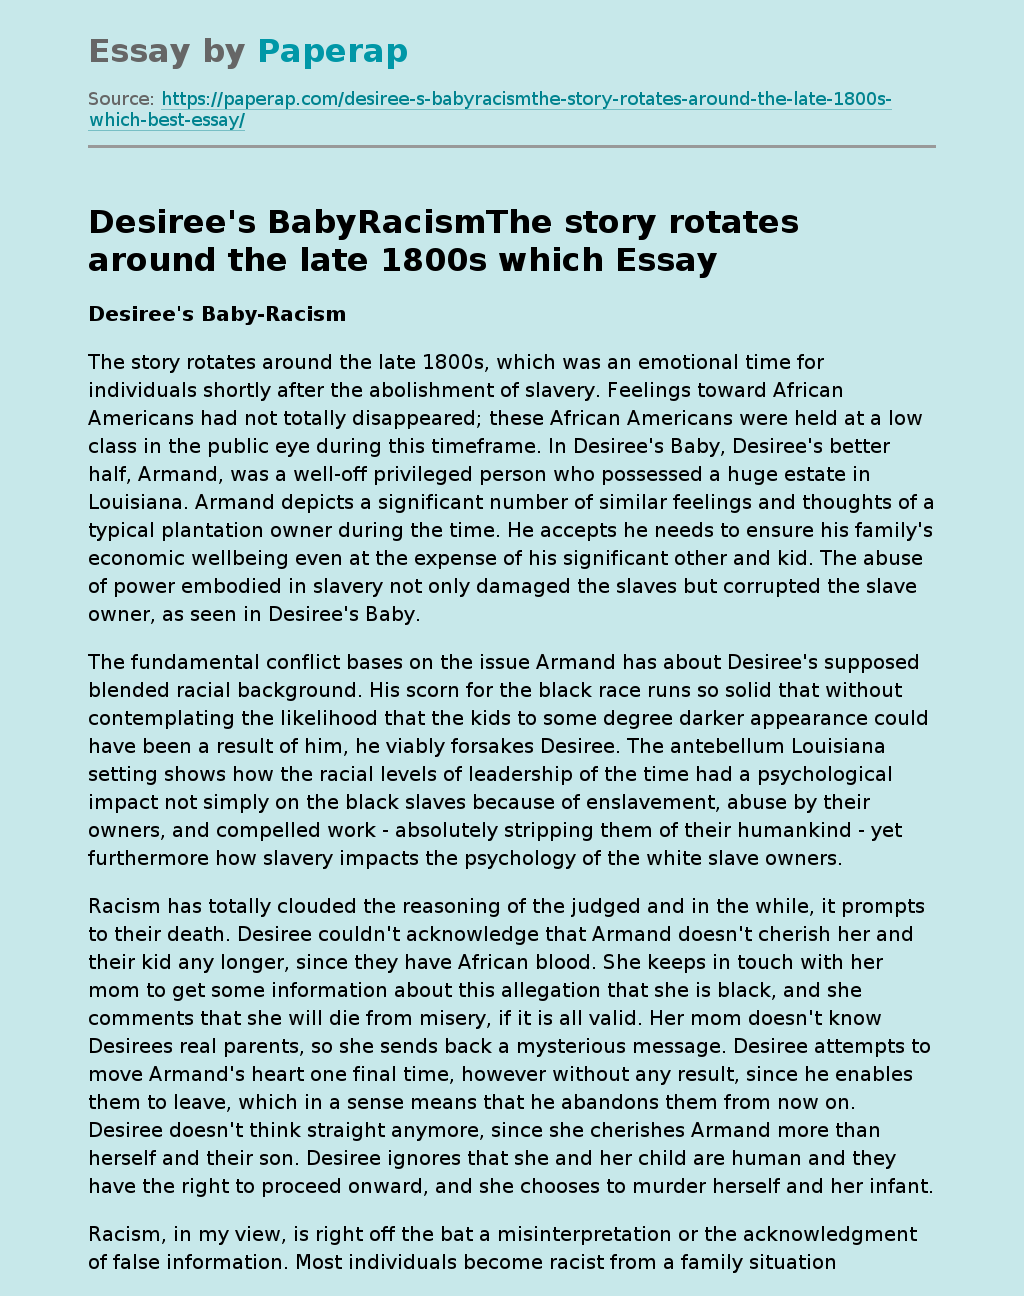 Desiree's BabyRacismThe story rotates around the late 1800s which